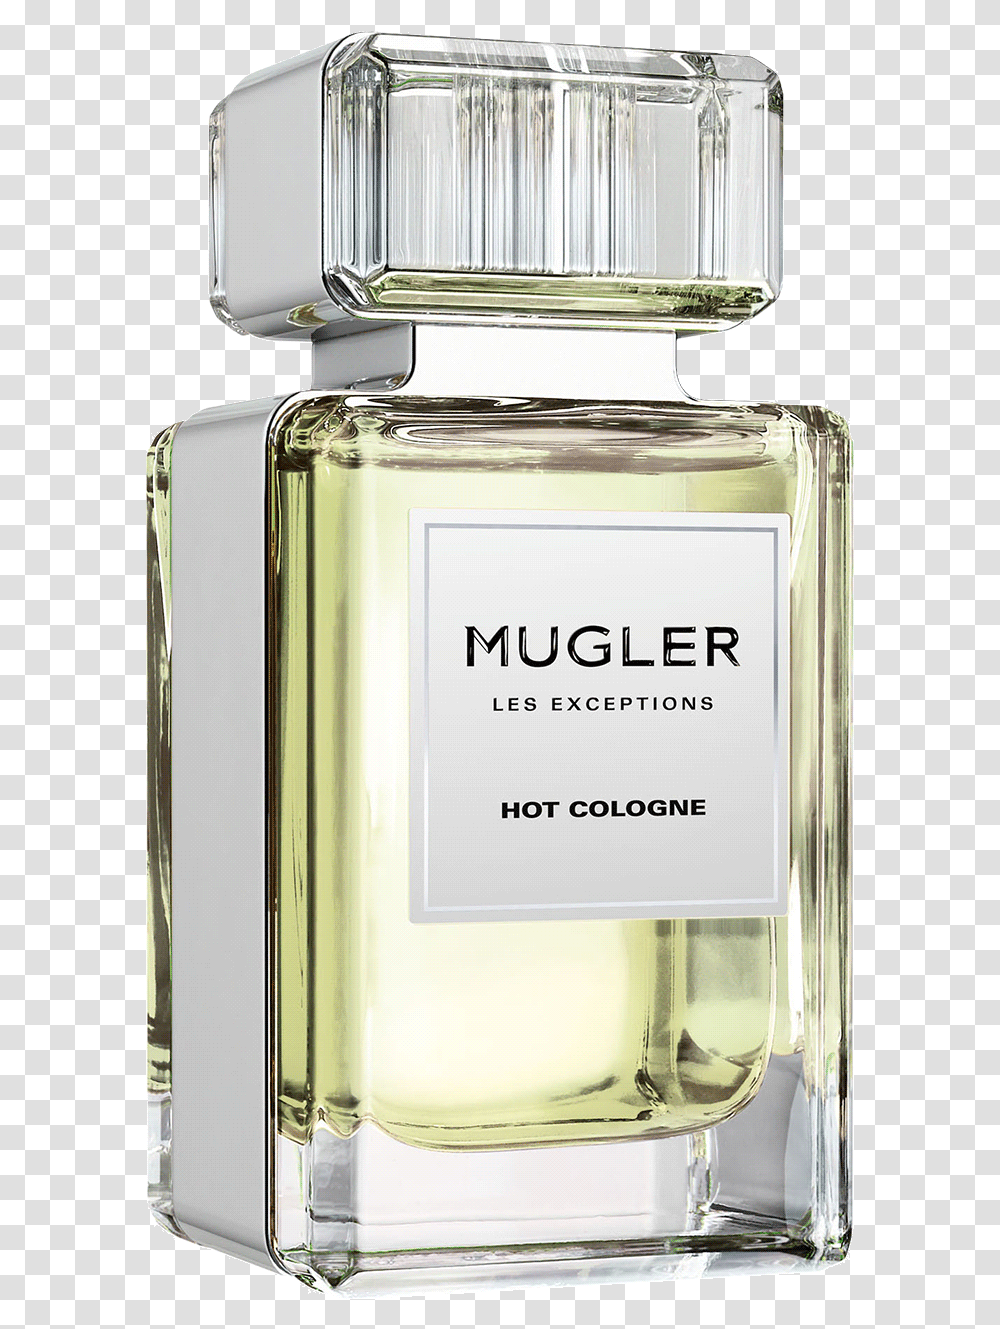 Les Exceptions Hot Cologne Mugler Perfume Les Exceptions, Bottle, Cosmetics, Refrigerator, Appliance Transparent Png